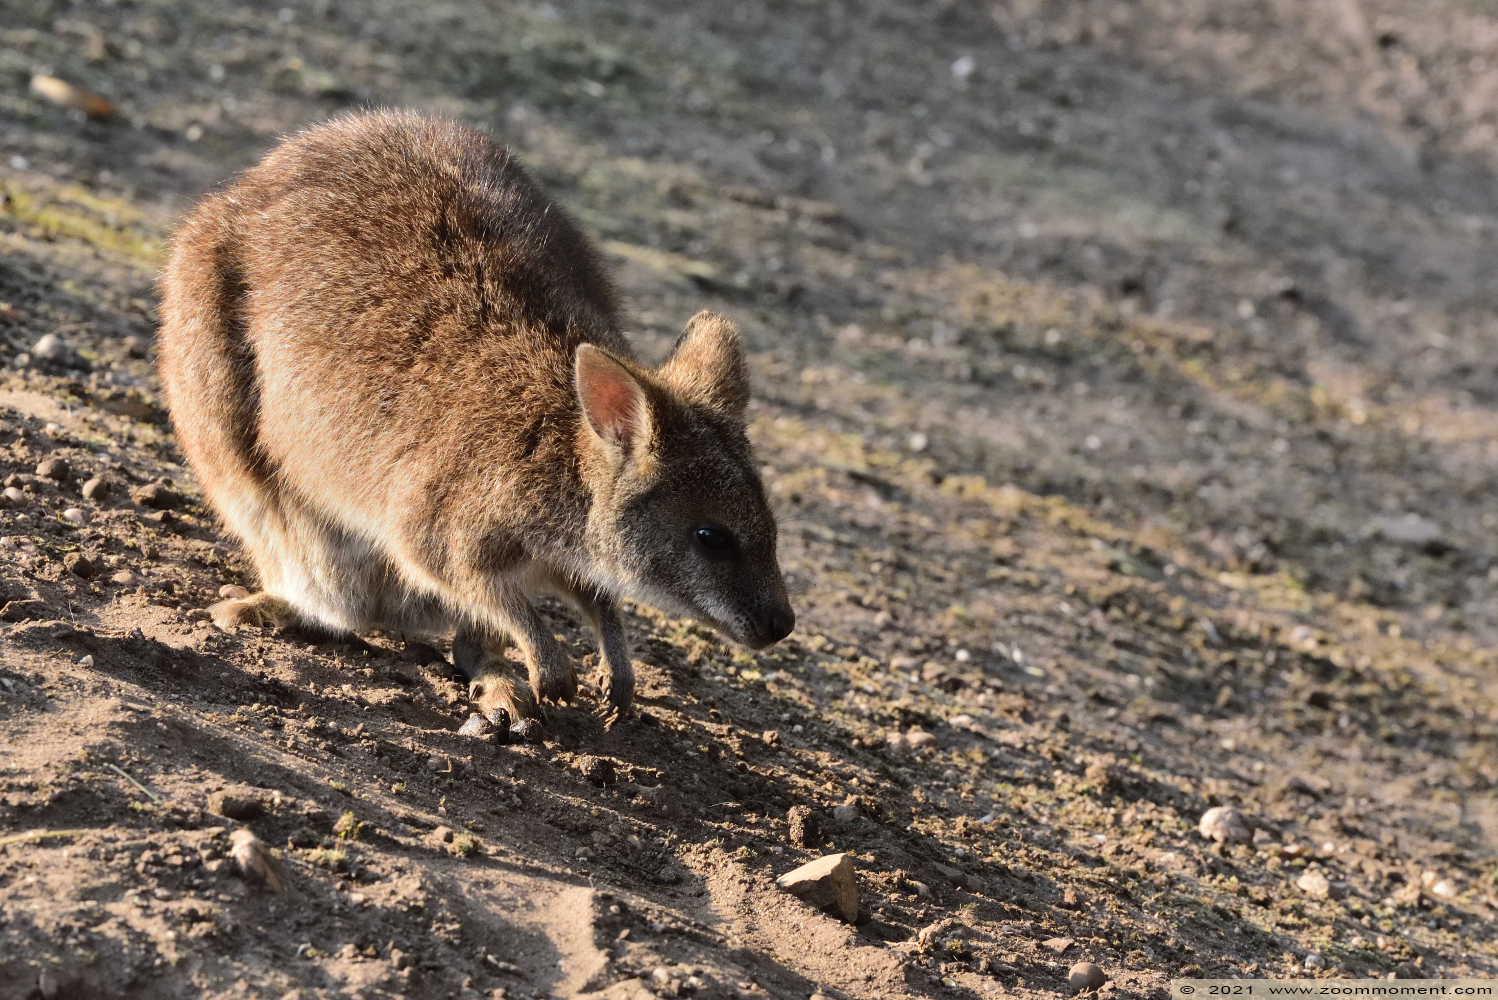 Bennett- of roodnekwallaby ( Macropus rufogriseus ) red necked wallaby
Keywords: Ziezoo Volkel Nederland Bennett roodnekwallaby Macropus rufogriseus red necked wallaby